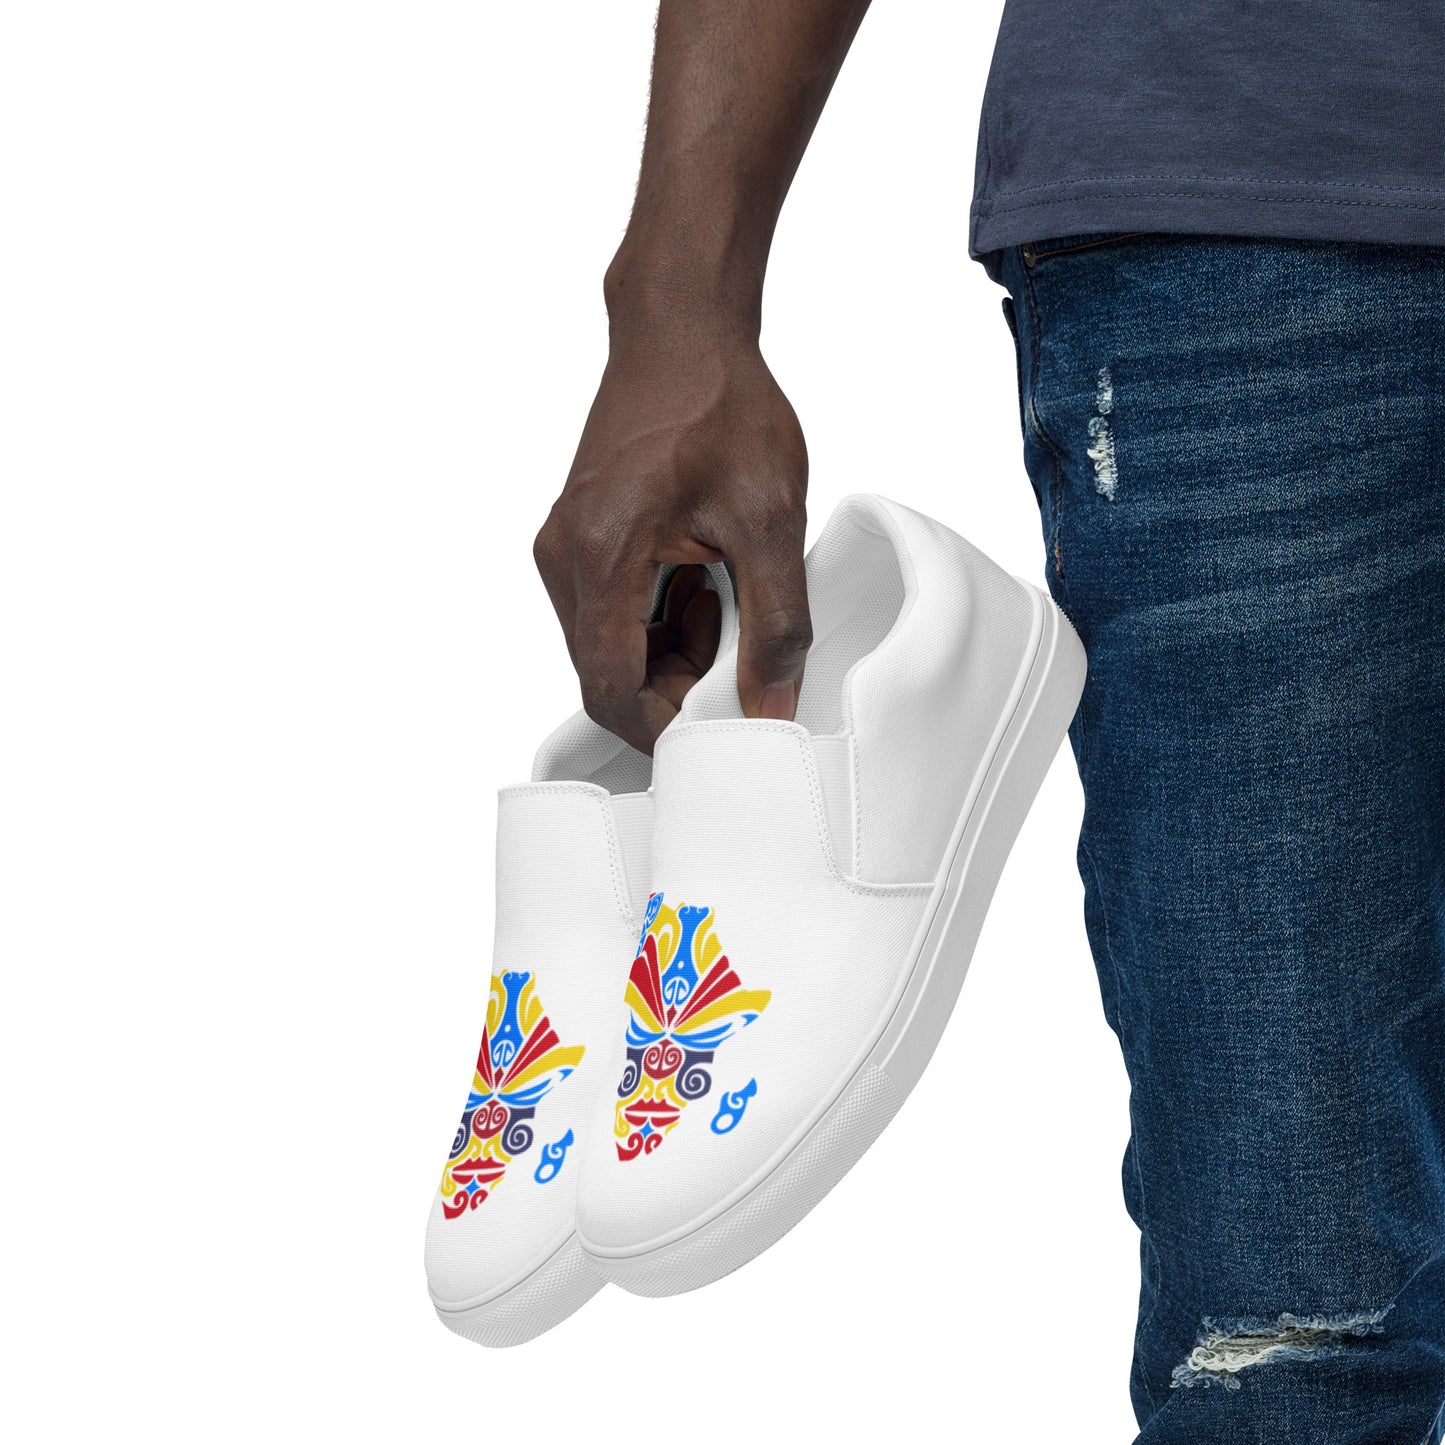 Men’s Slip-on Canvas Shoes - Banamerica Collection